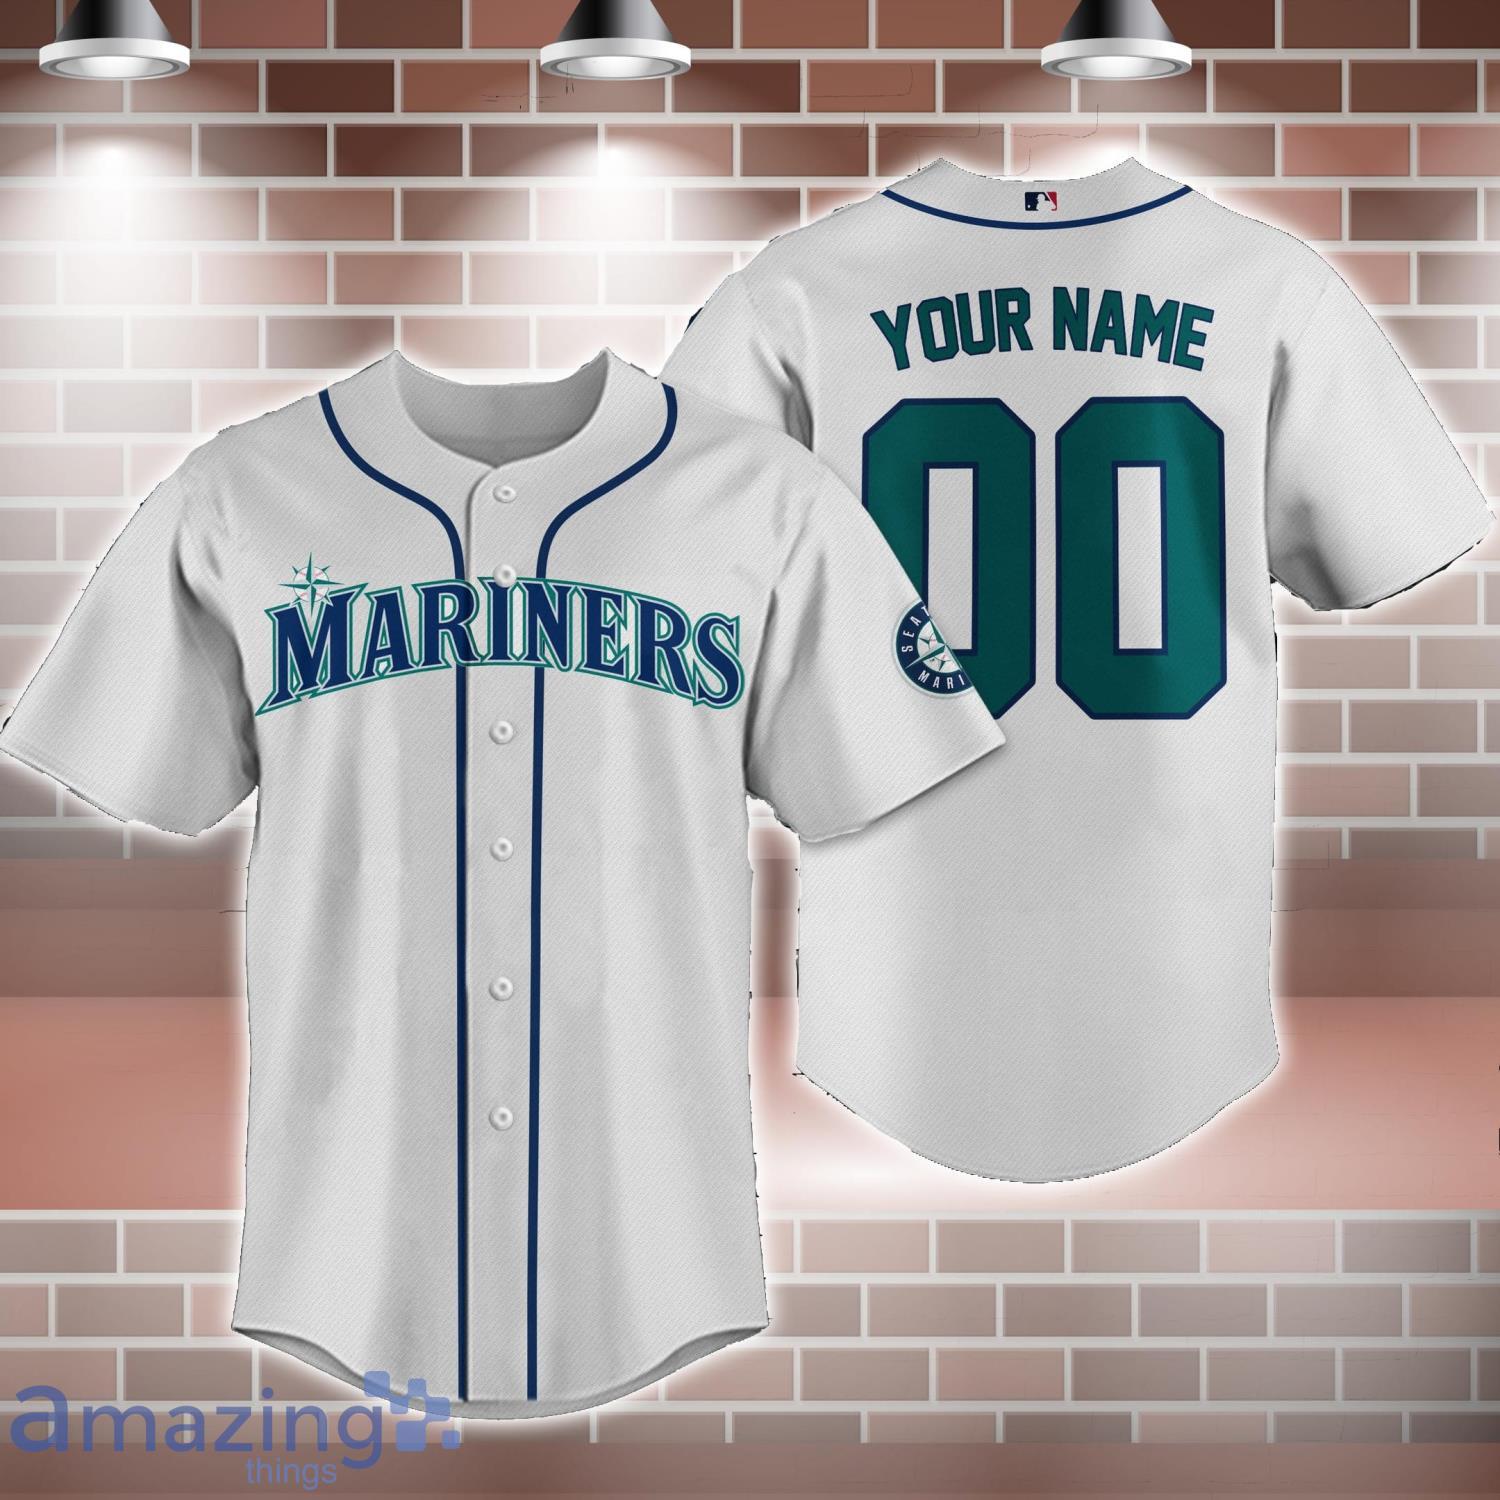 Seattle Mariners White MLB Jerseys for sale